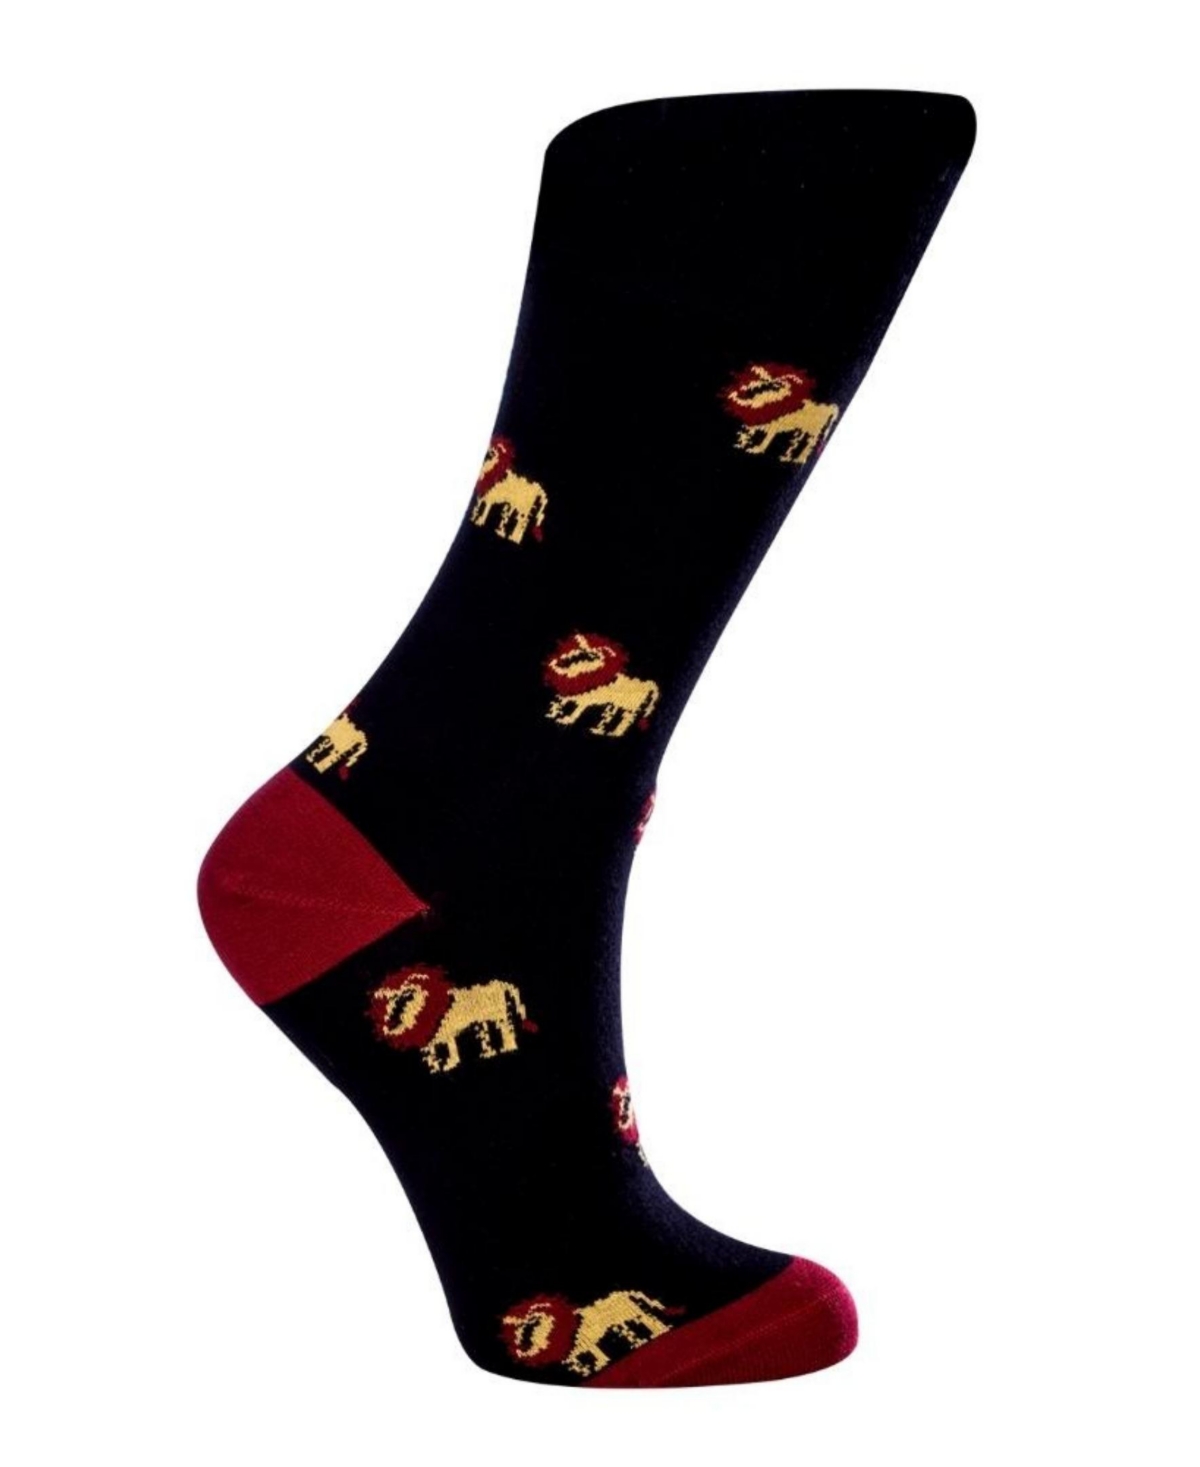 Women's Lions W-Cotton Dress Socks with Seamless Toe Design, Pack of 1 - Black